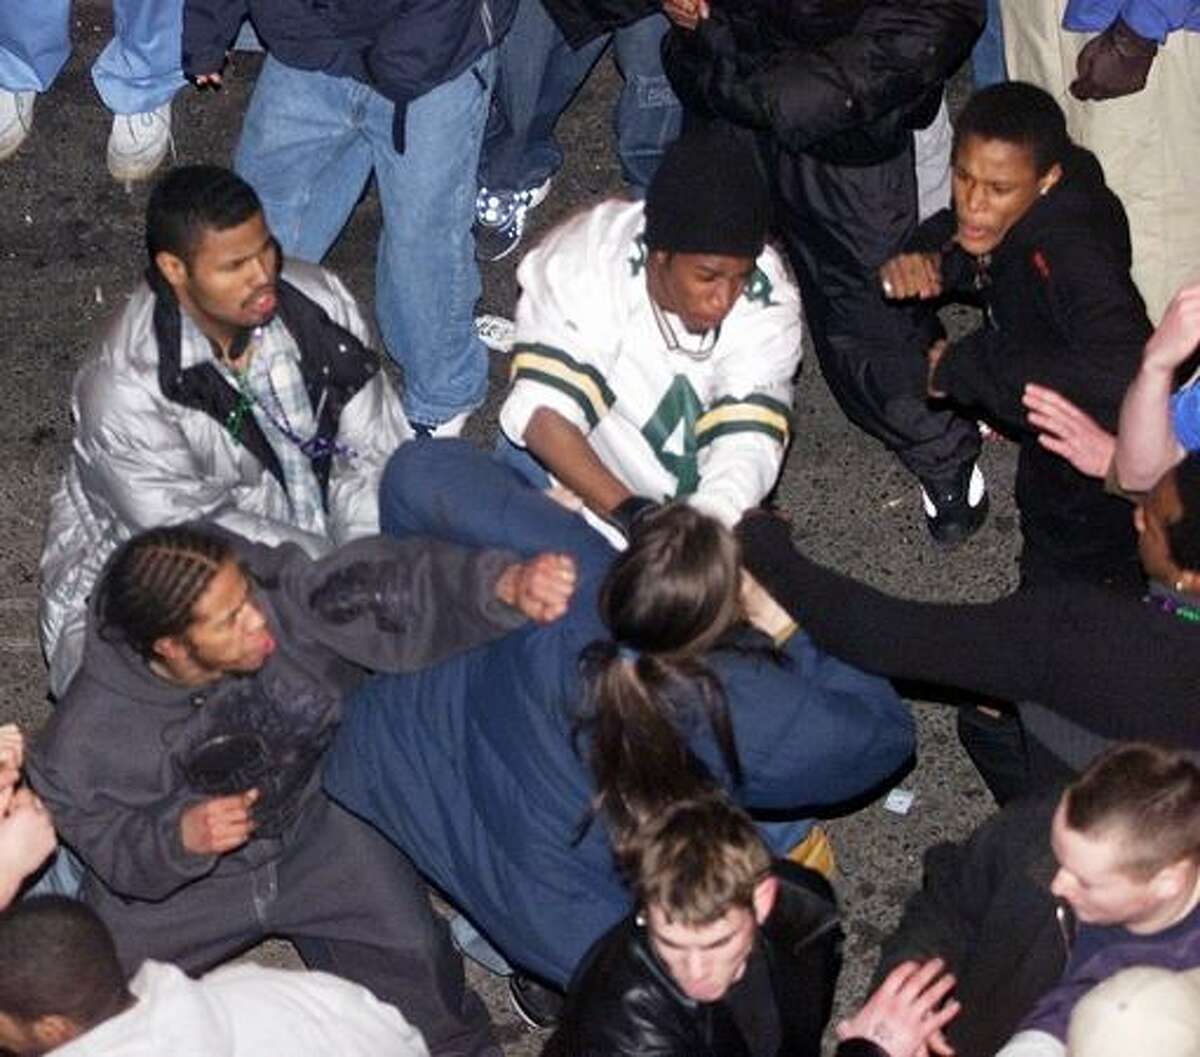 A group of young men beat another man in Pioneer Square as Fat Tuesday celebrations came to a close.